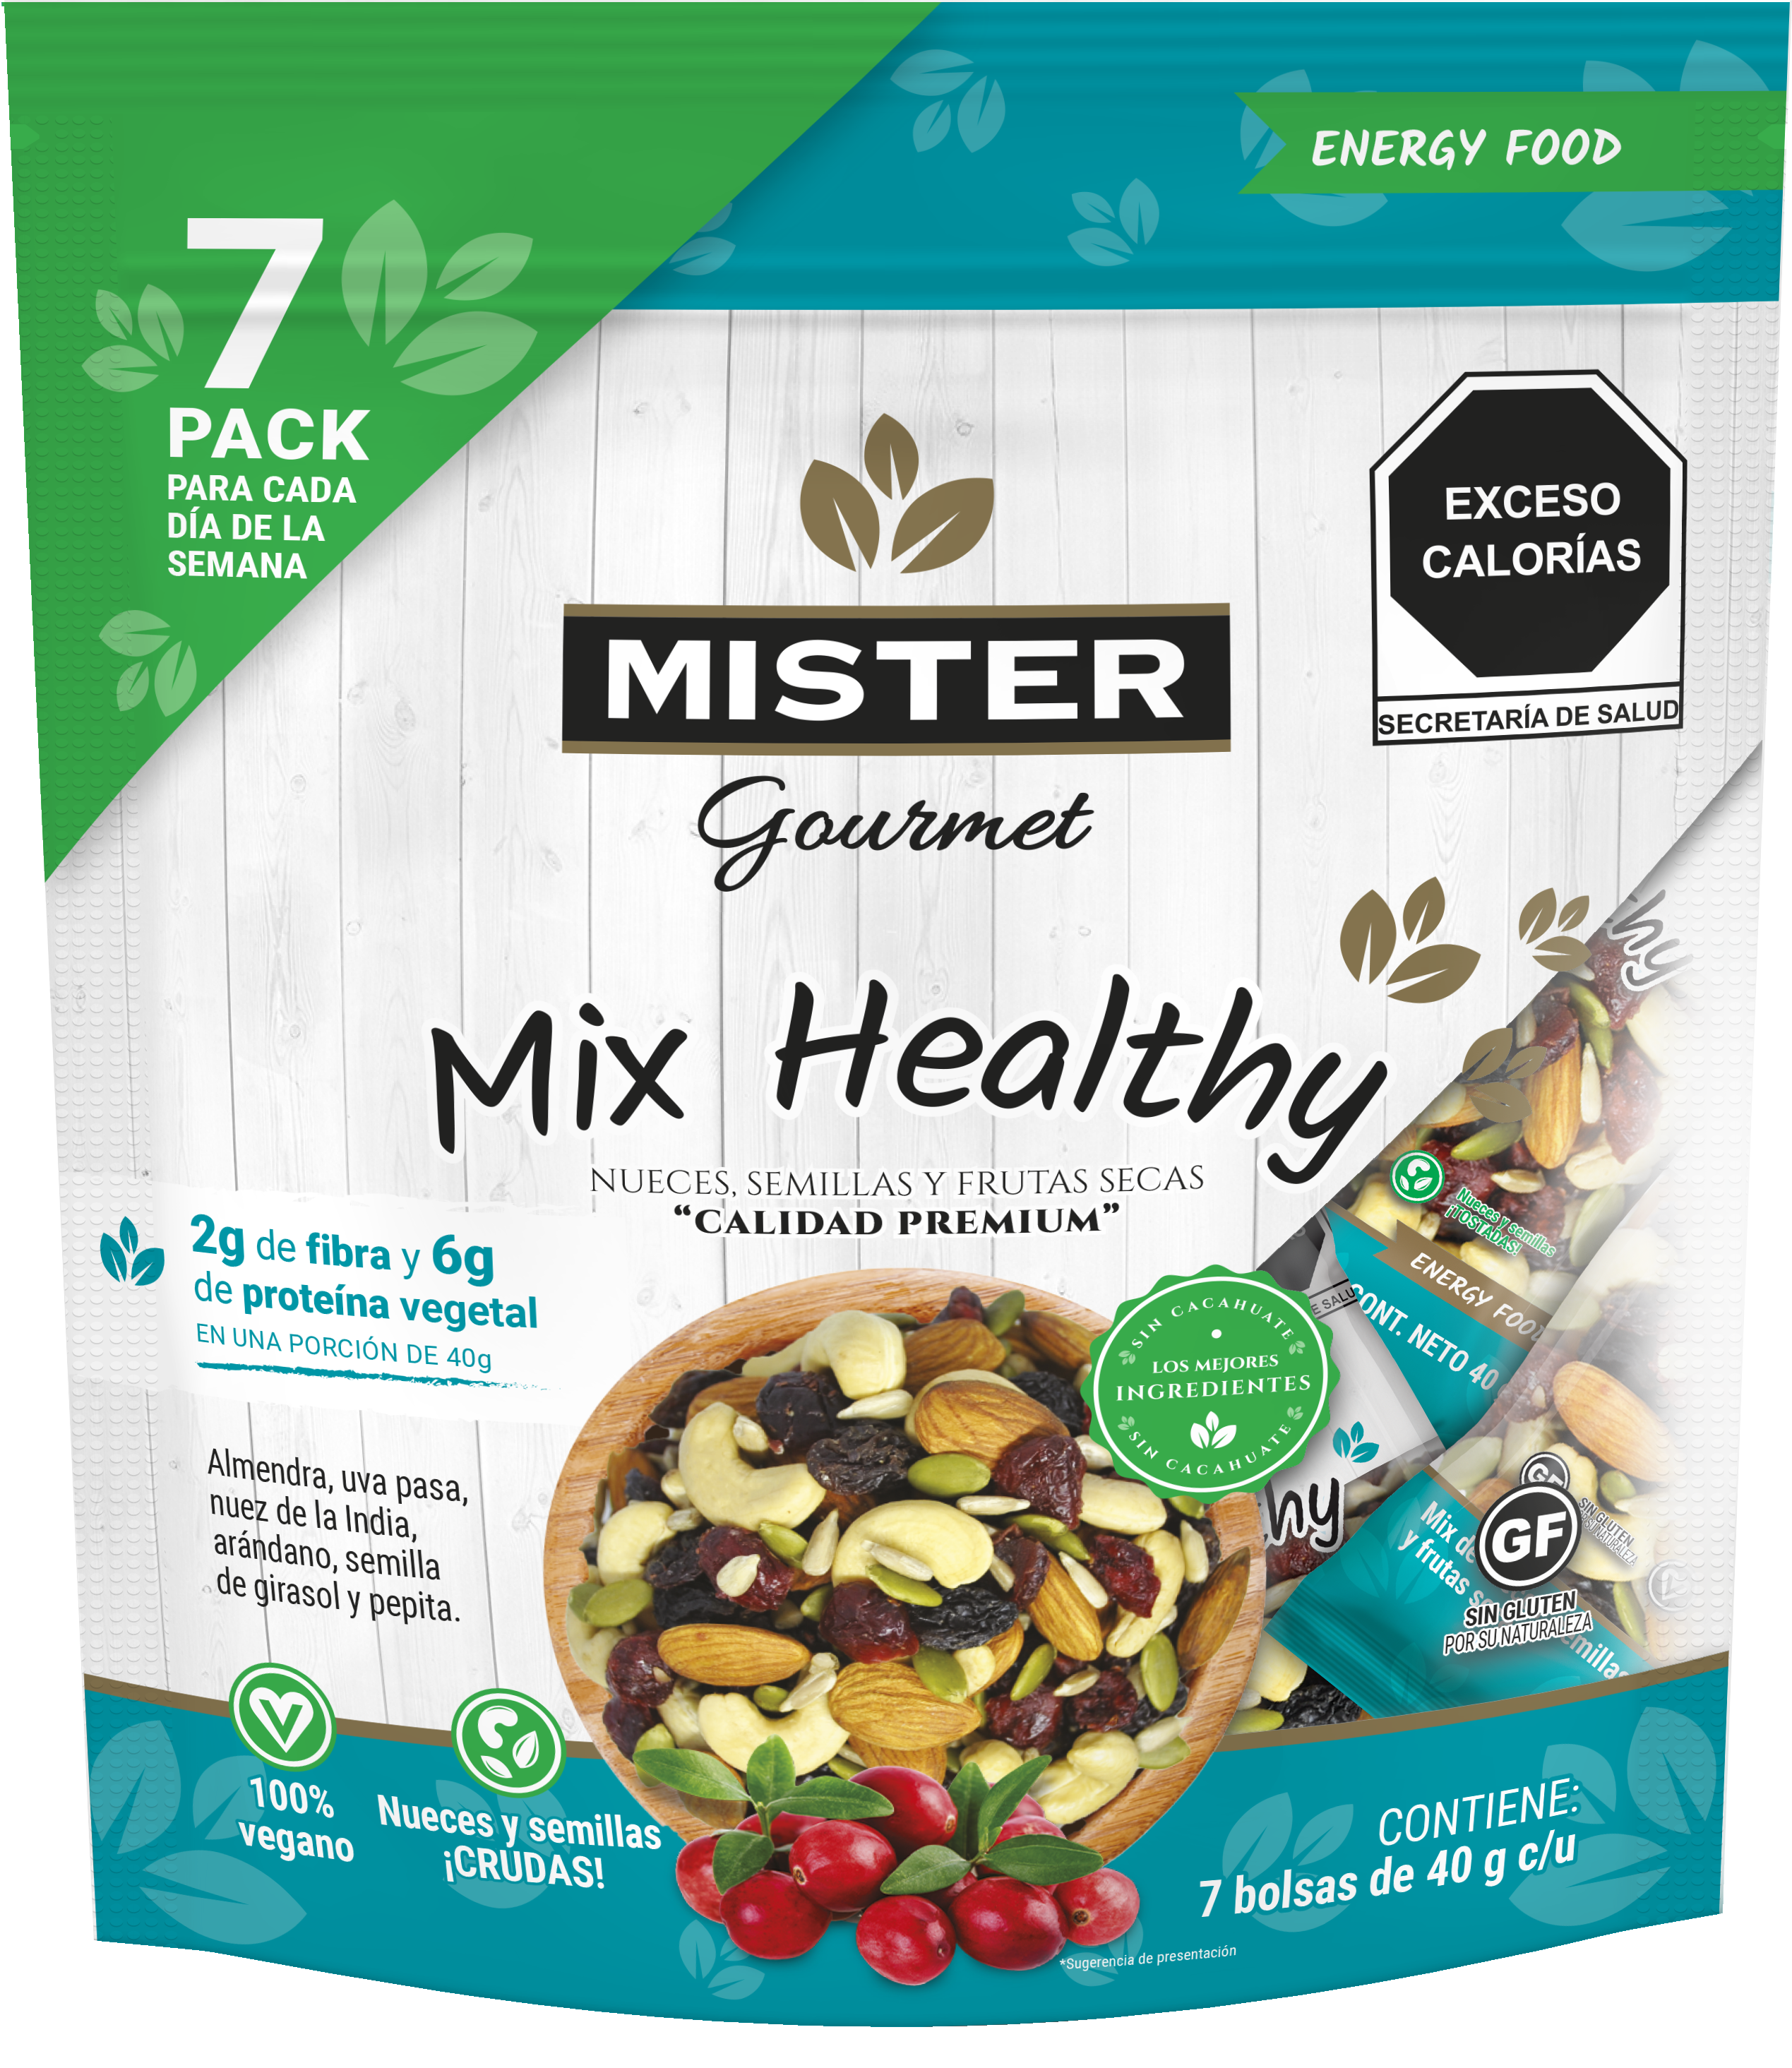 7 pack Mix Healthy